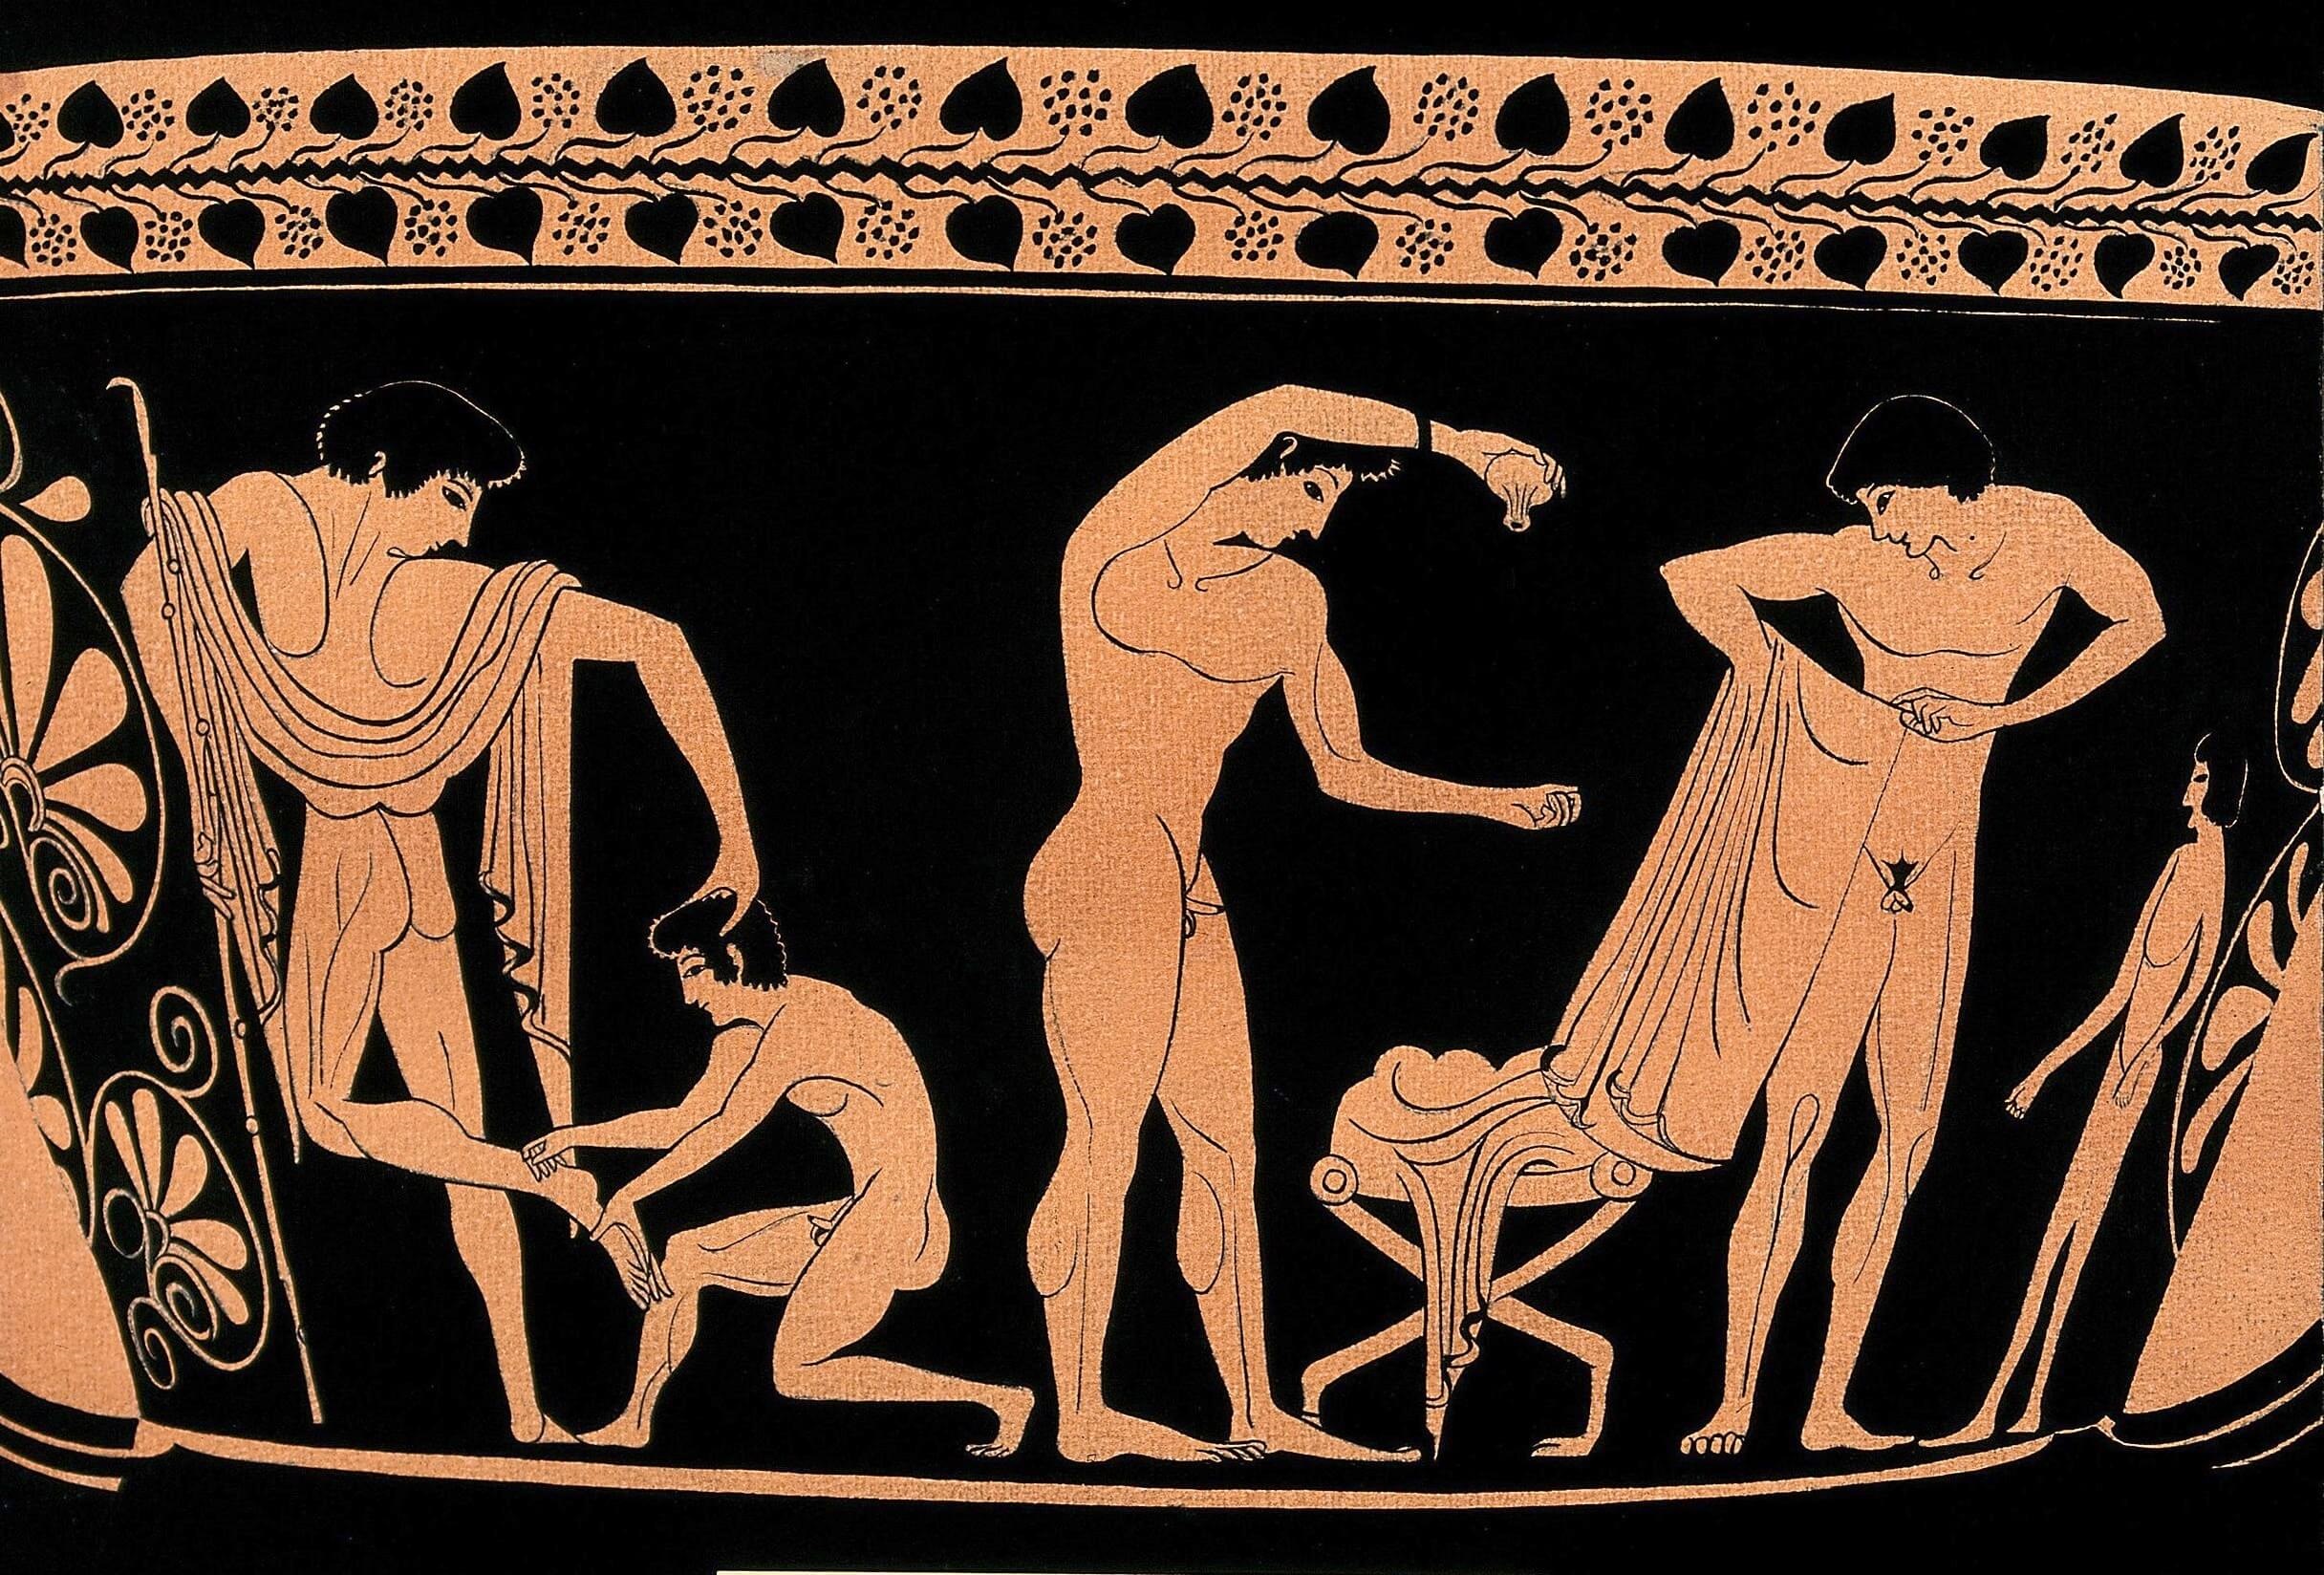 Athletes at a gym. Attributed to Euphronios, 6th Century (Courtesy: Wellcome Collection)